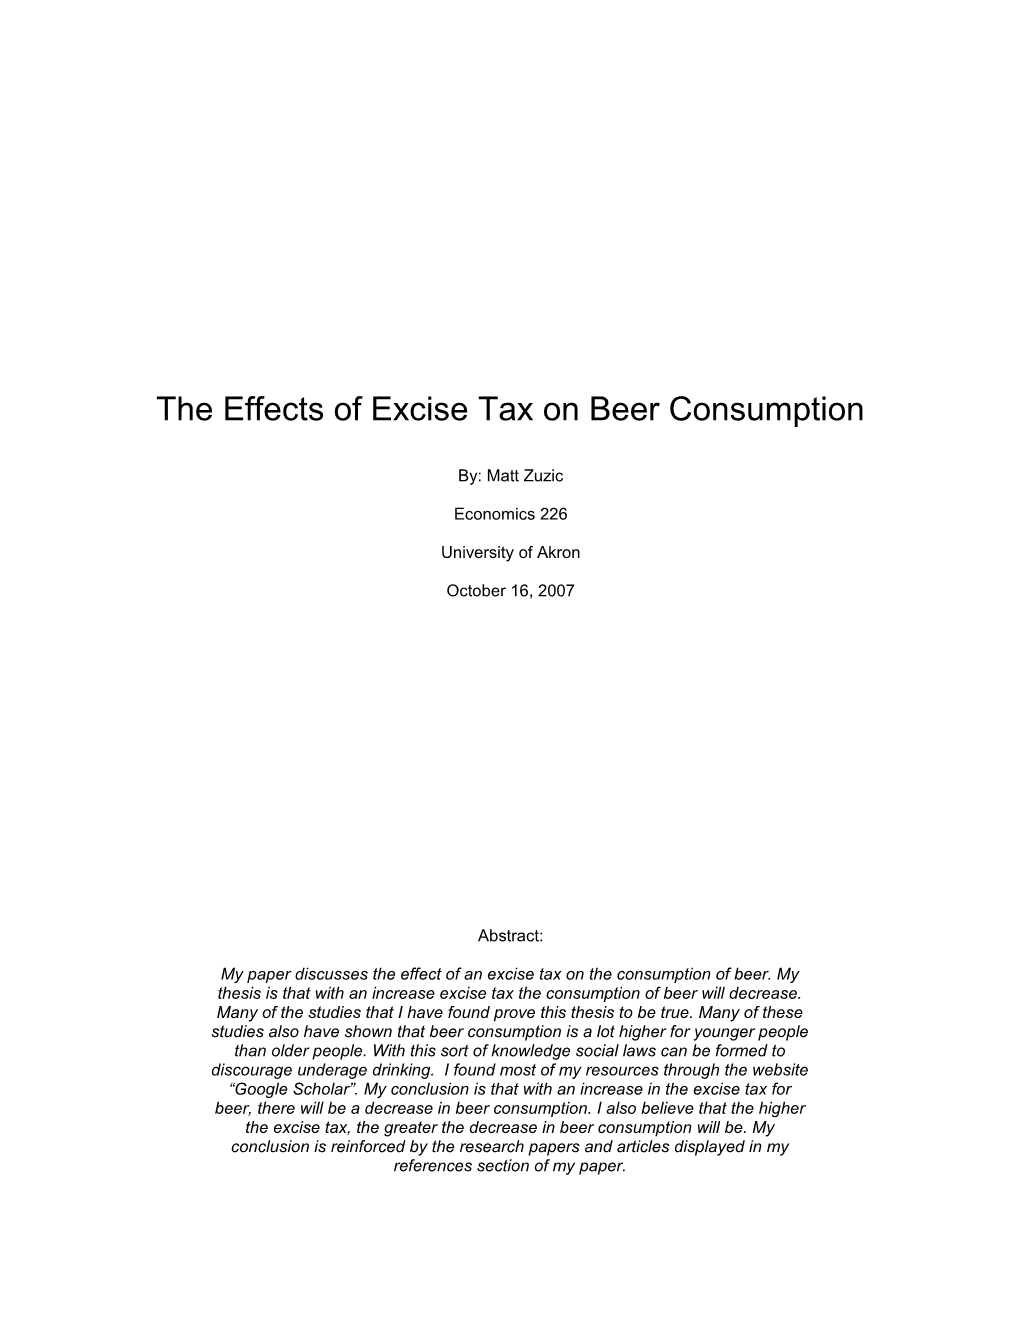 The Effects of Excise Tax on Beer Consumption